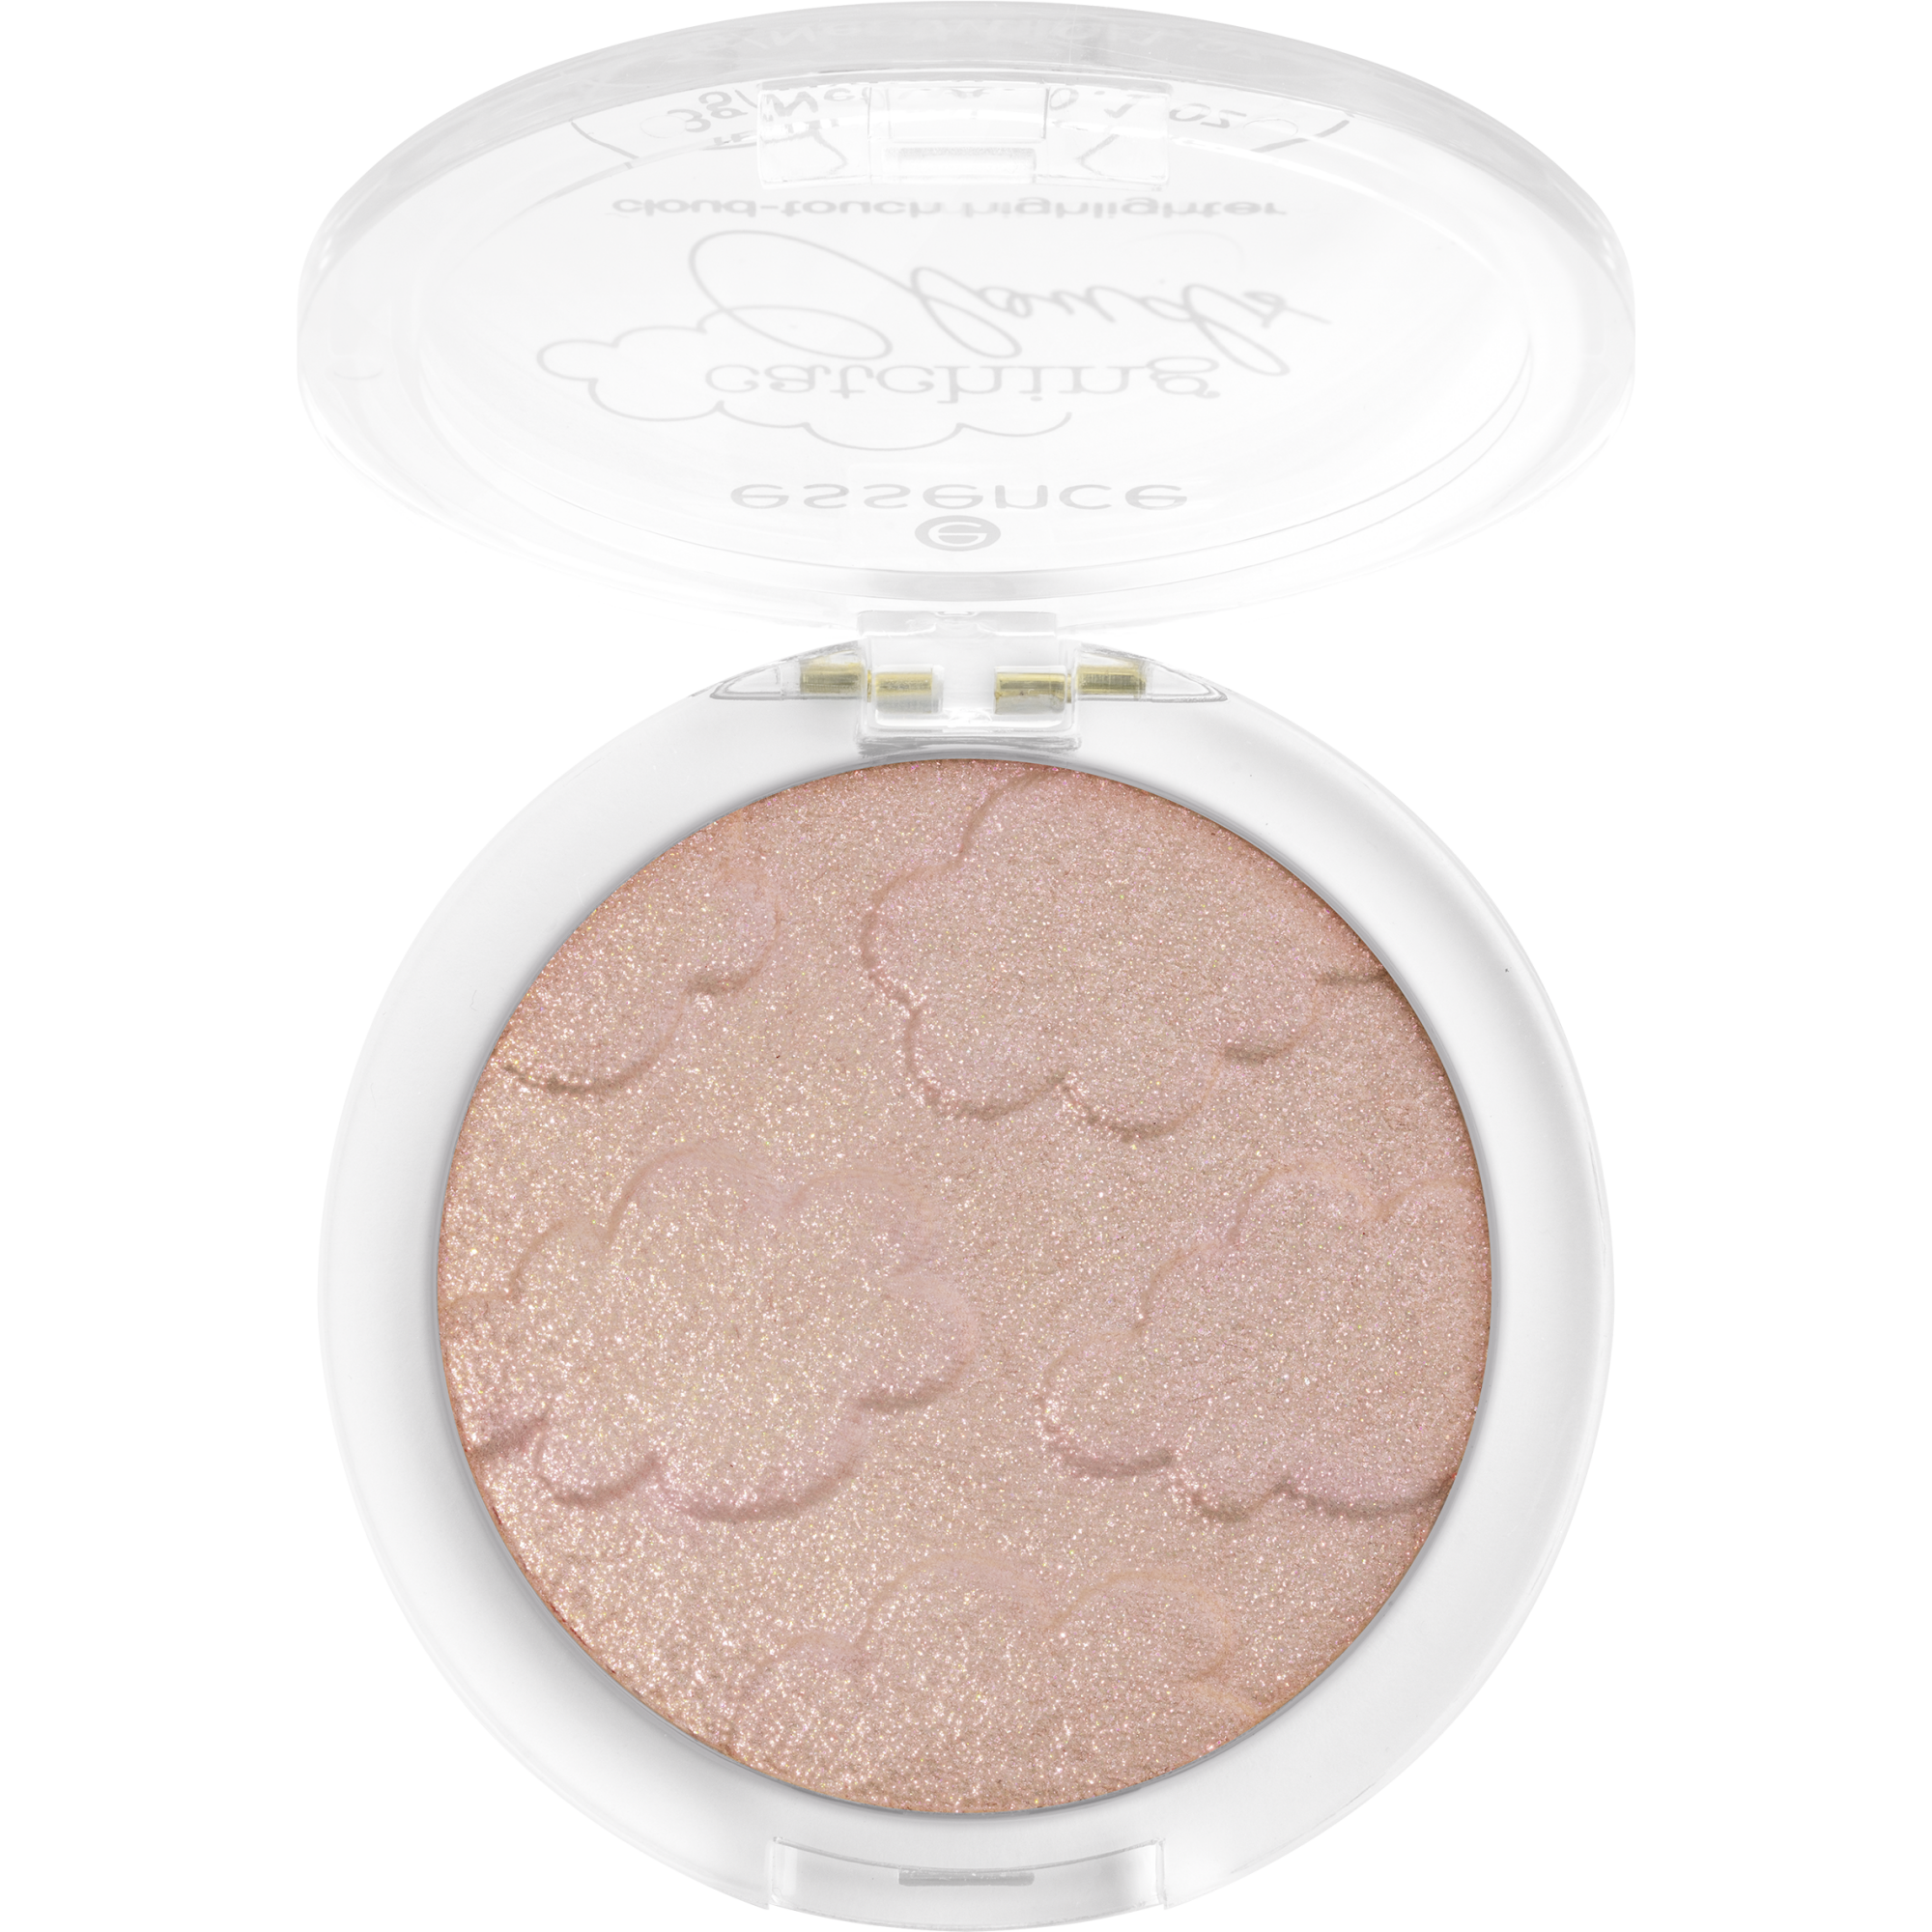 catching Clouds cloud-touch highlighter